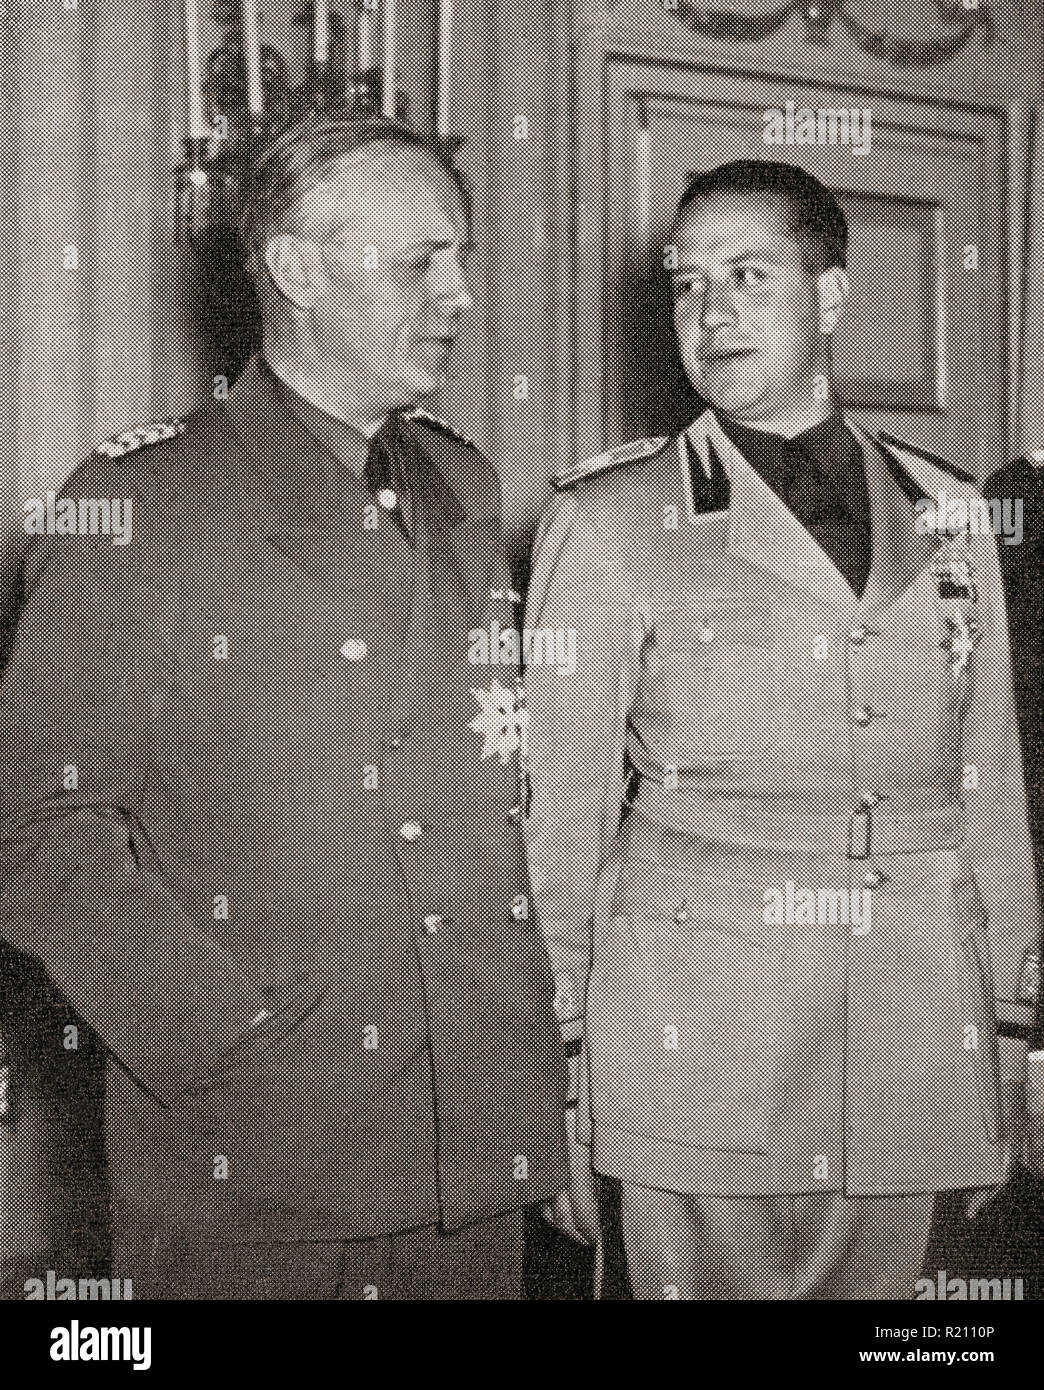 Ribbentrop, left, and Count Ciano, right.  Ulrich Friedrich Wilhelm Joachim von Ribbentrop, 1893 – 1946, aka Joachim von Ribbentrop. Foreign Minister of Nazi Germany, 1938 - 1945.  Gian Galeazzo Ciano, 2nd Count of Cortellazzo and Buccari, 1903 – 1944. Foreign Minister of Fascist Italy, 1936 - 1943 and Benito Mussolini's son-in-law.  From L'Illustration, published 1939. Stock Photo